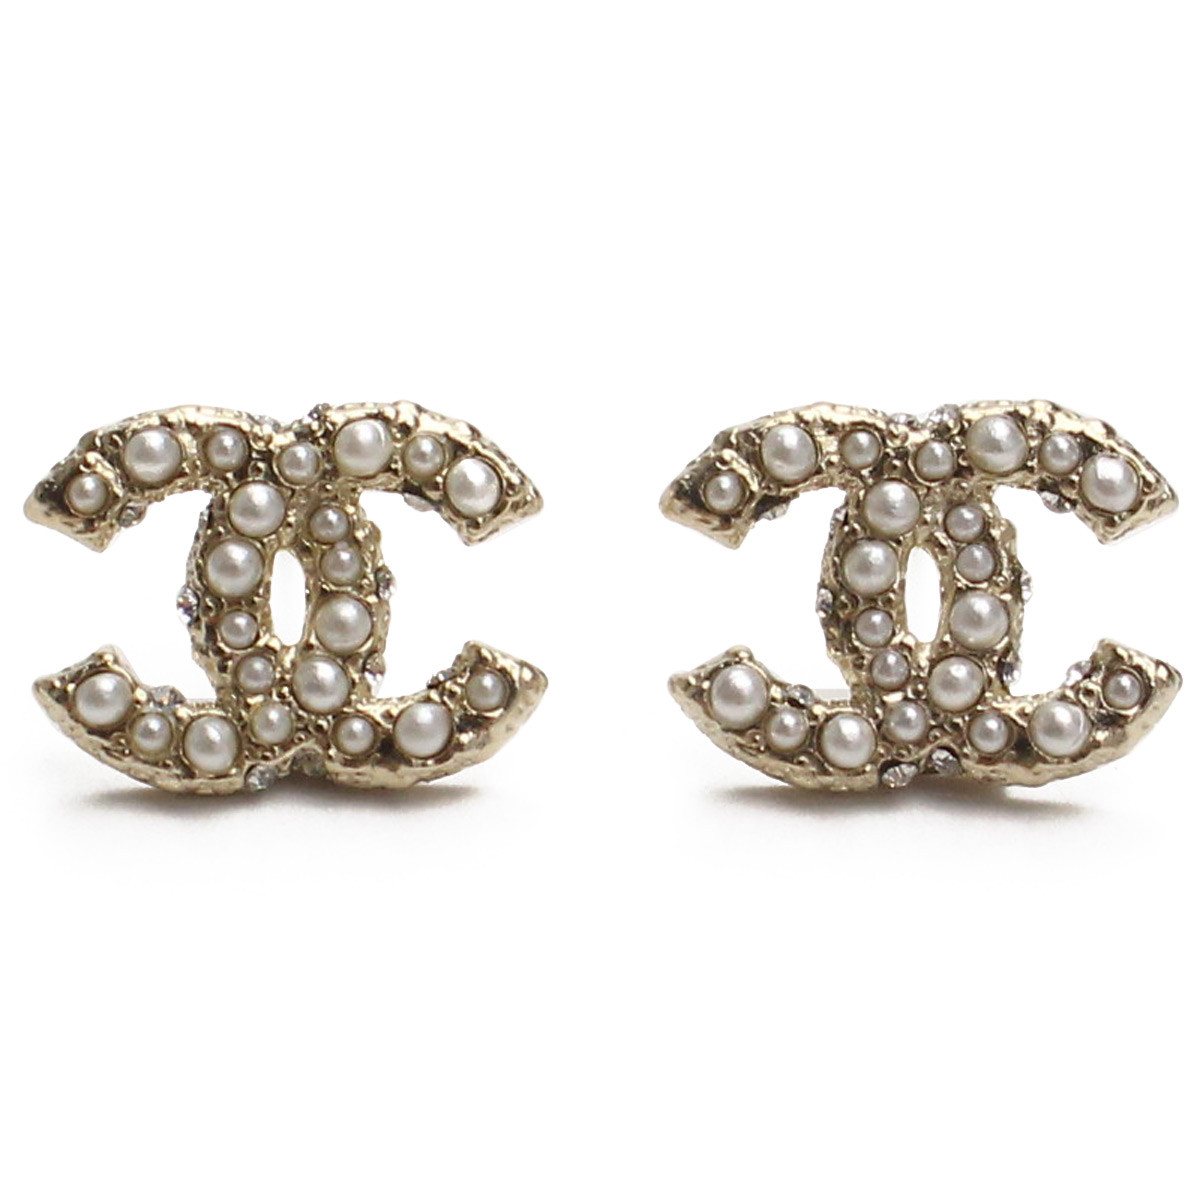 Cheap Chanel Earrings
 Bighit The total brand wholesale